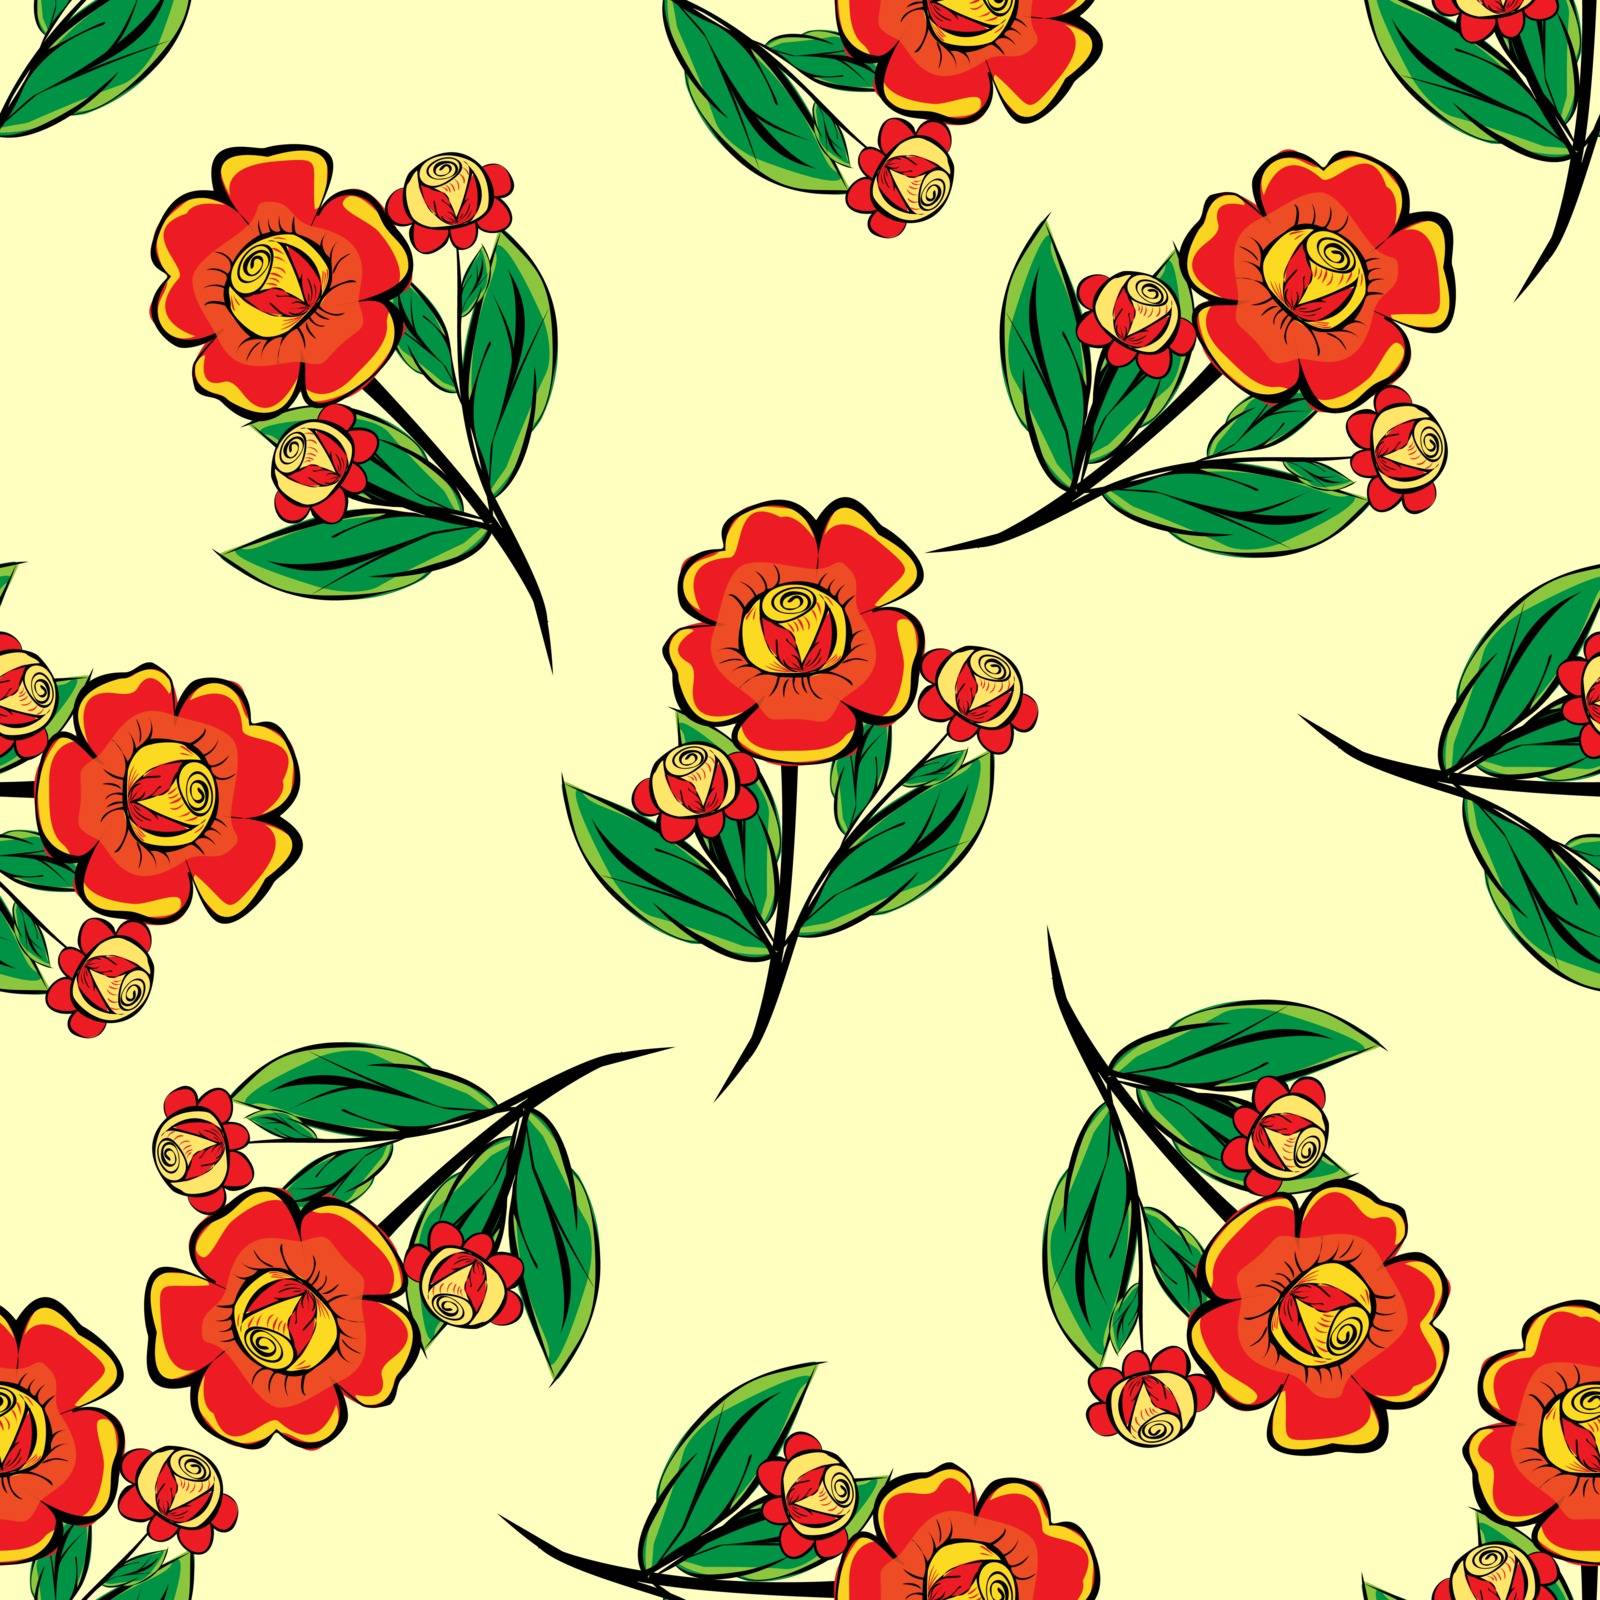 Red flowers on a green stalk seamless pattern by kozyrevaelena